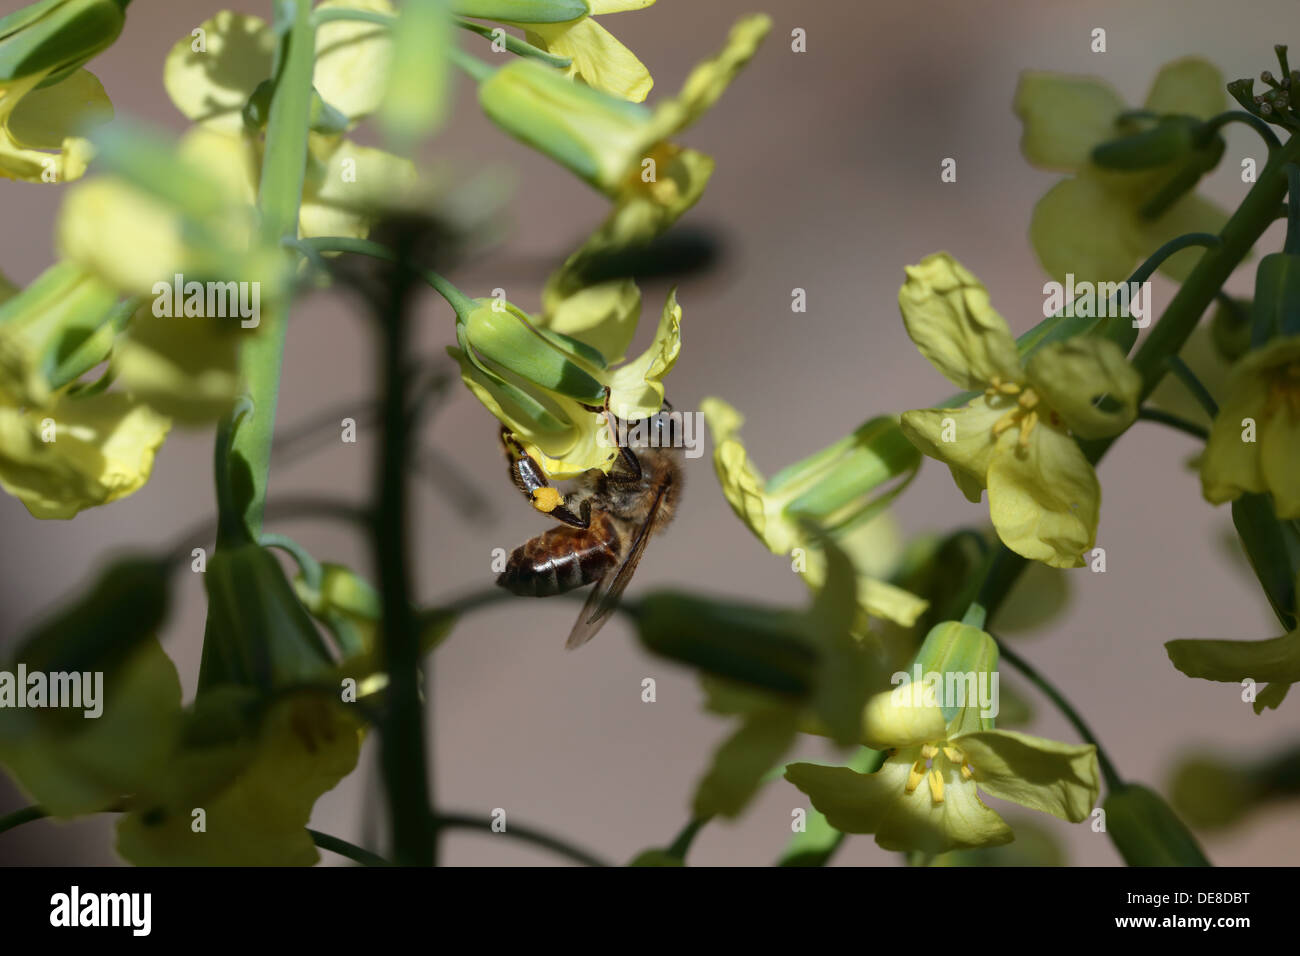 Bee feeding on nectar and collecting pollen from a broccoli flower in an urban garden in Cape Town Stock Photo